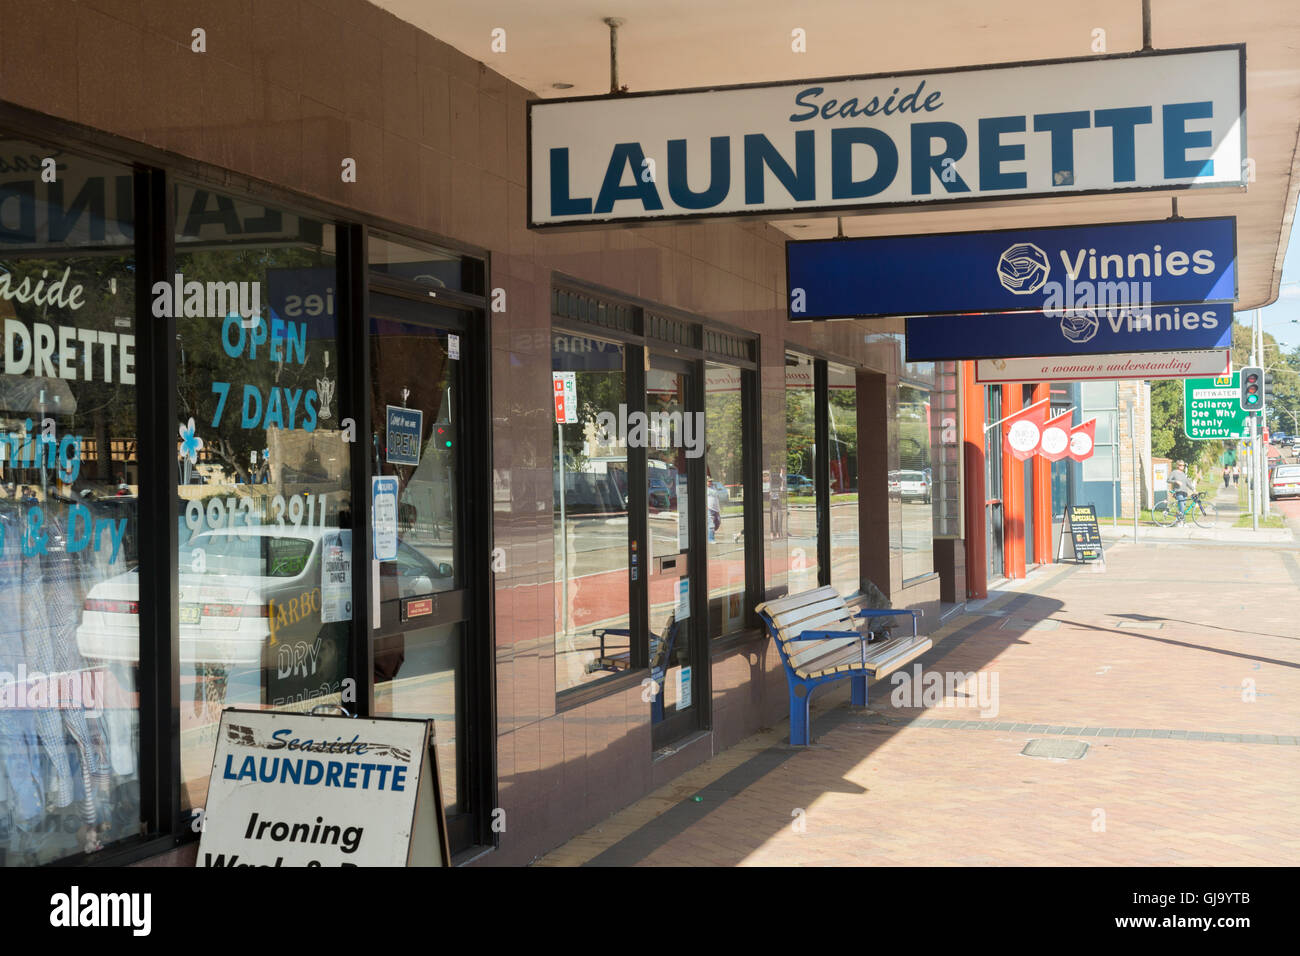 Laundrette and Vinnies charity shop in narrabeen, north Sydney, Australia Stock Photo